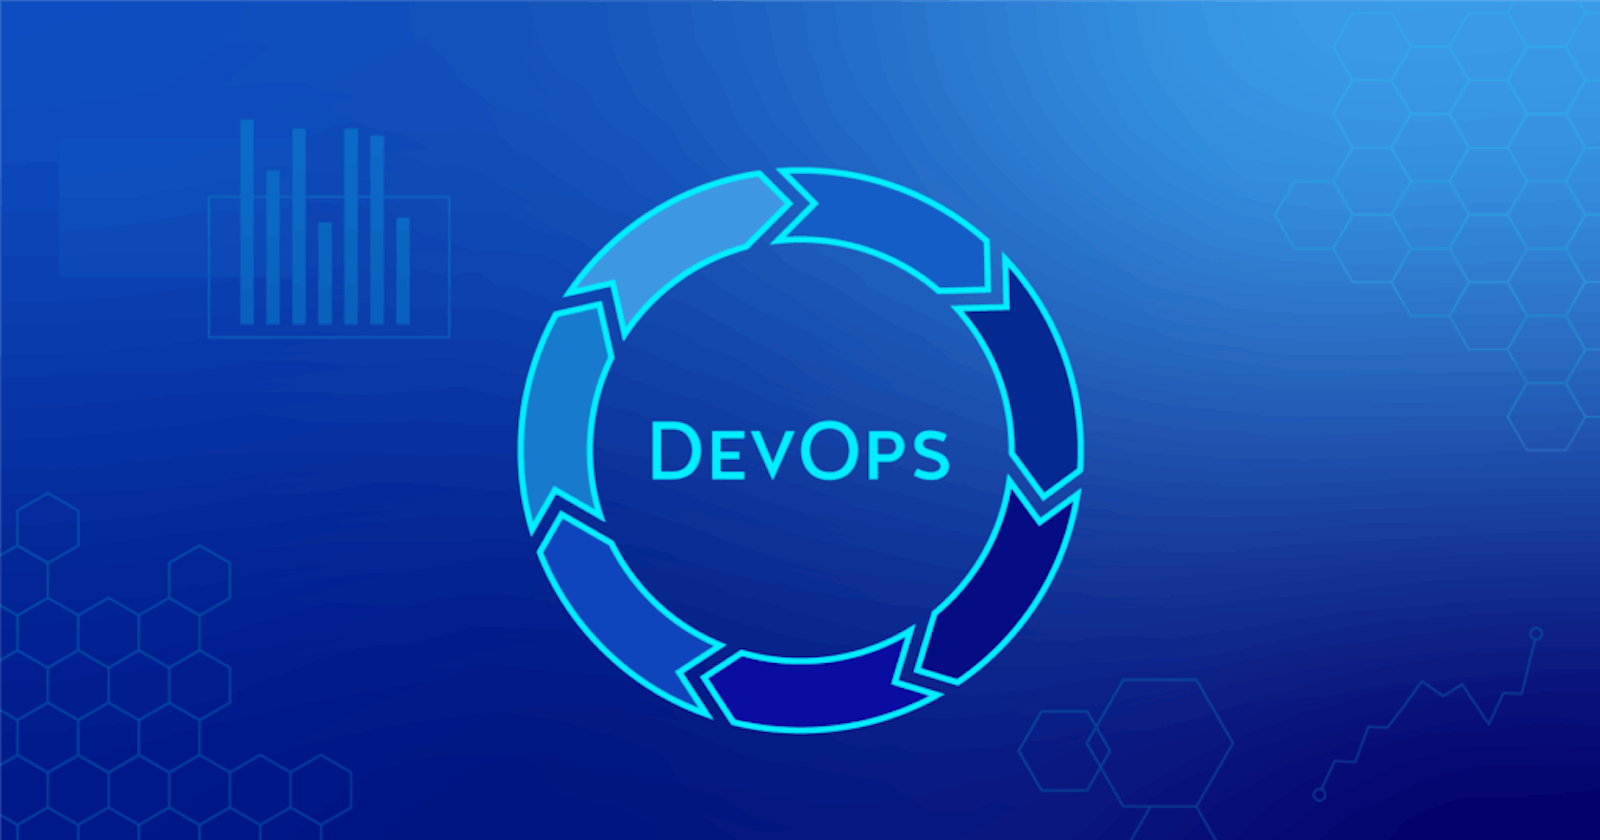 DevOps is the perfect way for organizations to adapt to change and grow.